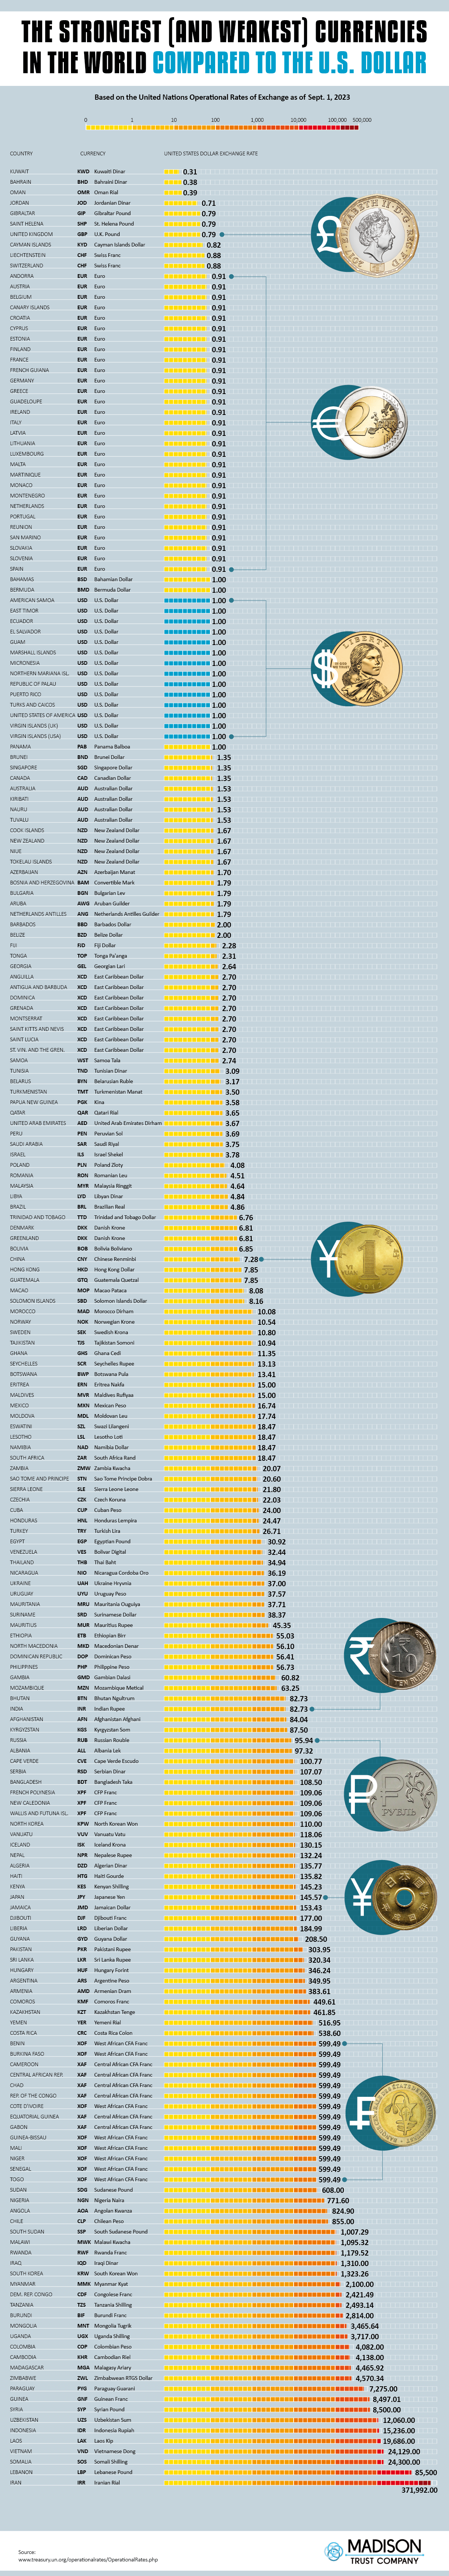 The Strongest (and Weakest) Currencies in the World Compared to the U.S. Dollar - MadisonTrust.com IRA - Infographic